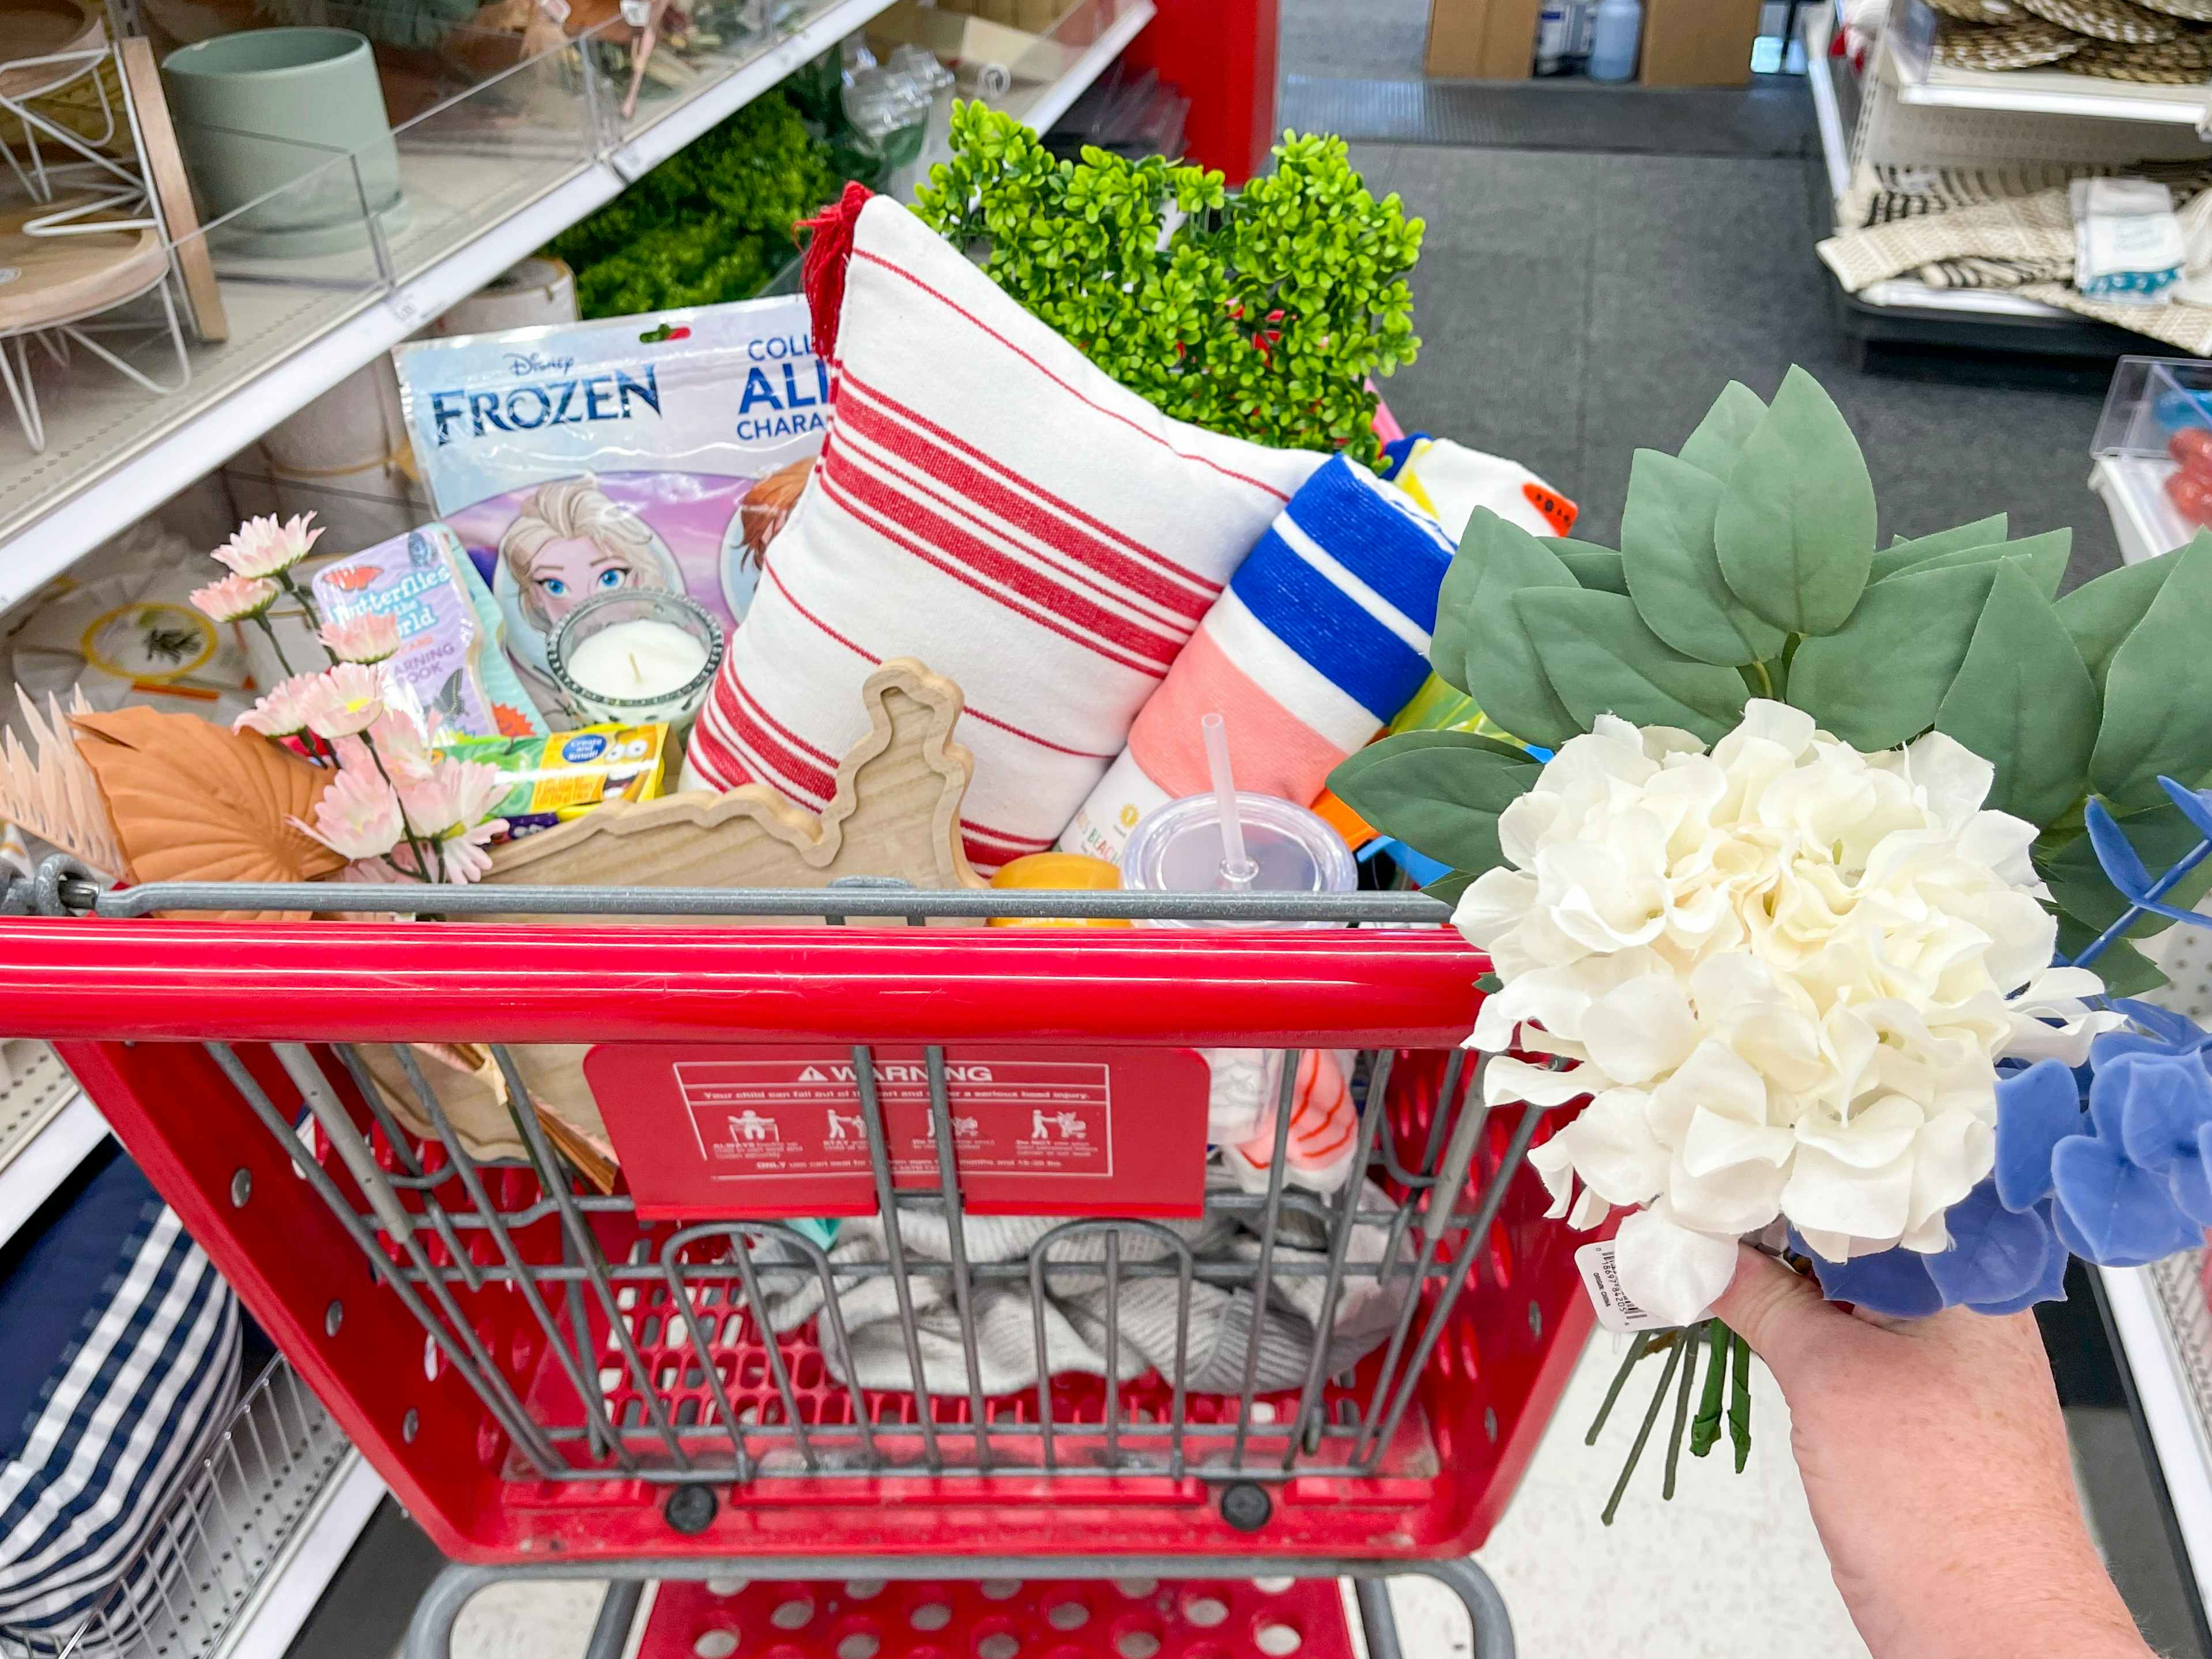 A person's hand holding up a bundle of silk flowers next to a Target shopping cart's basket filled with items from the Dollar Spot.